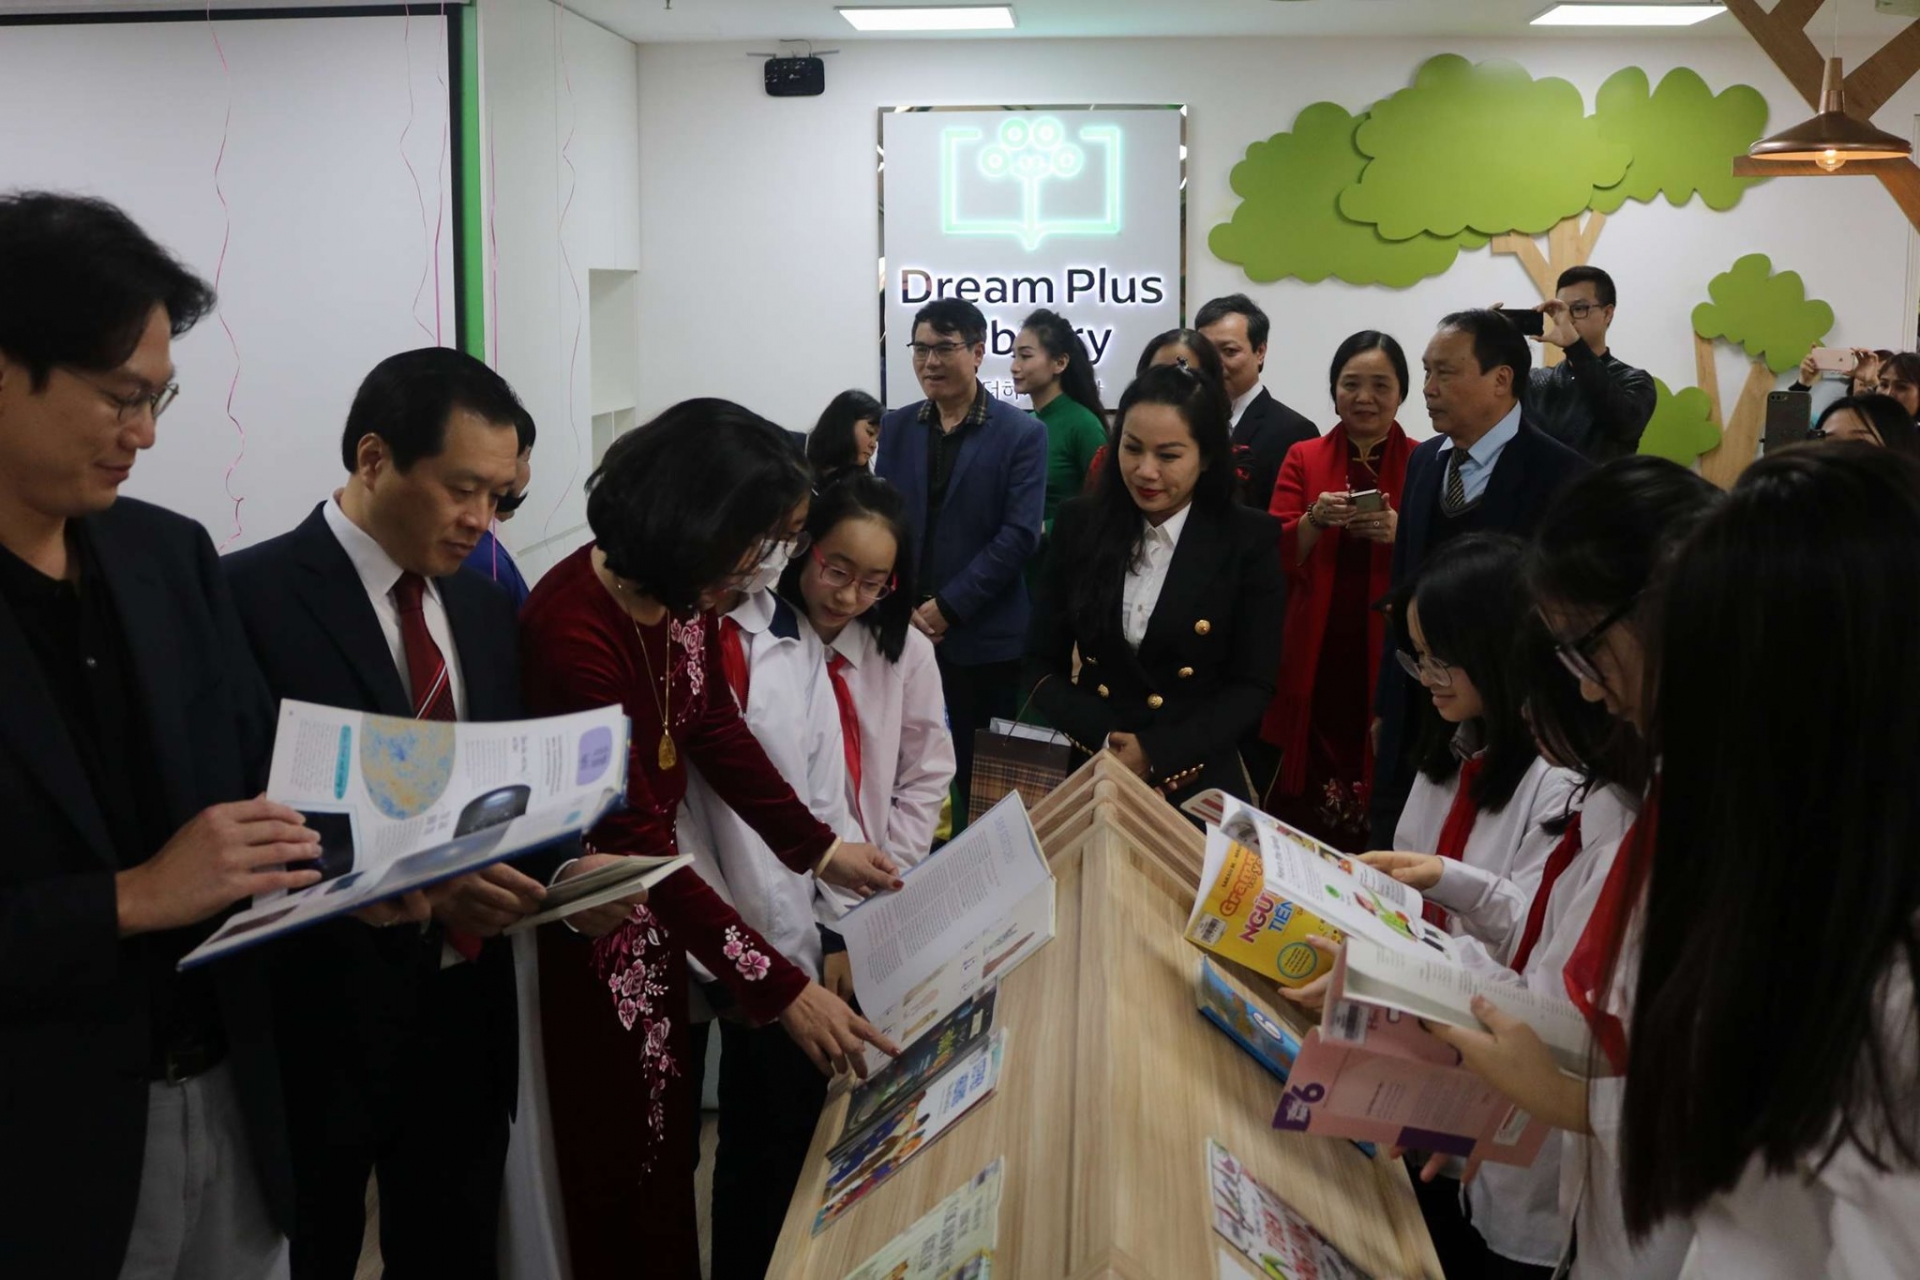 RoK sponsored Dream Plus Library launched at Hanoi Library